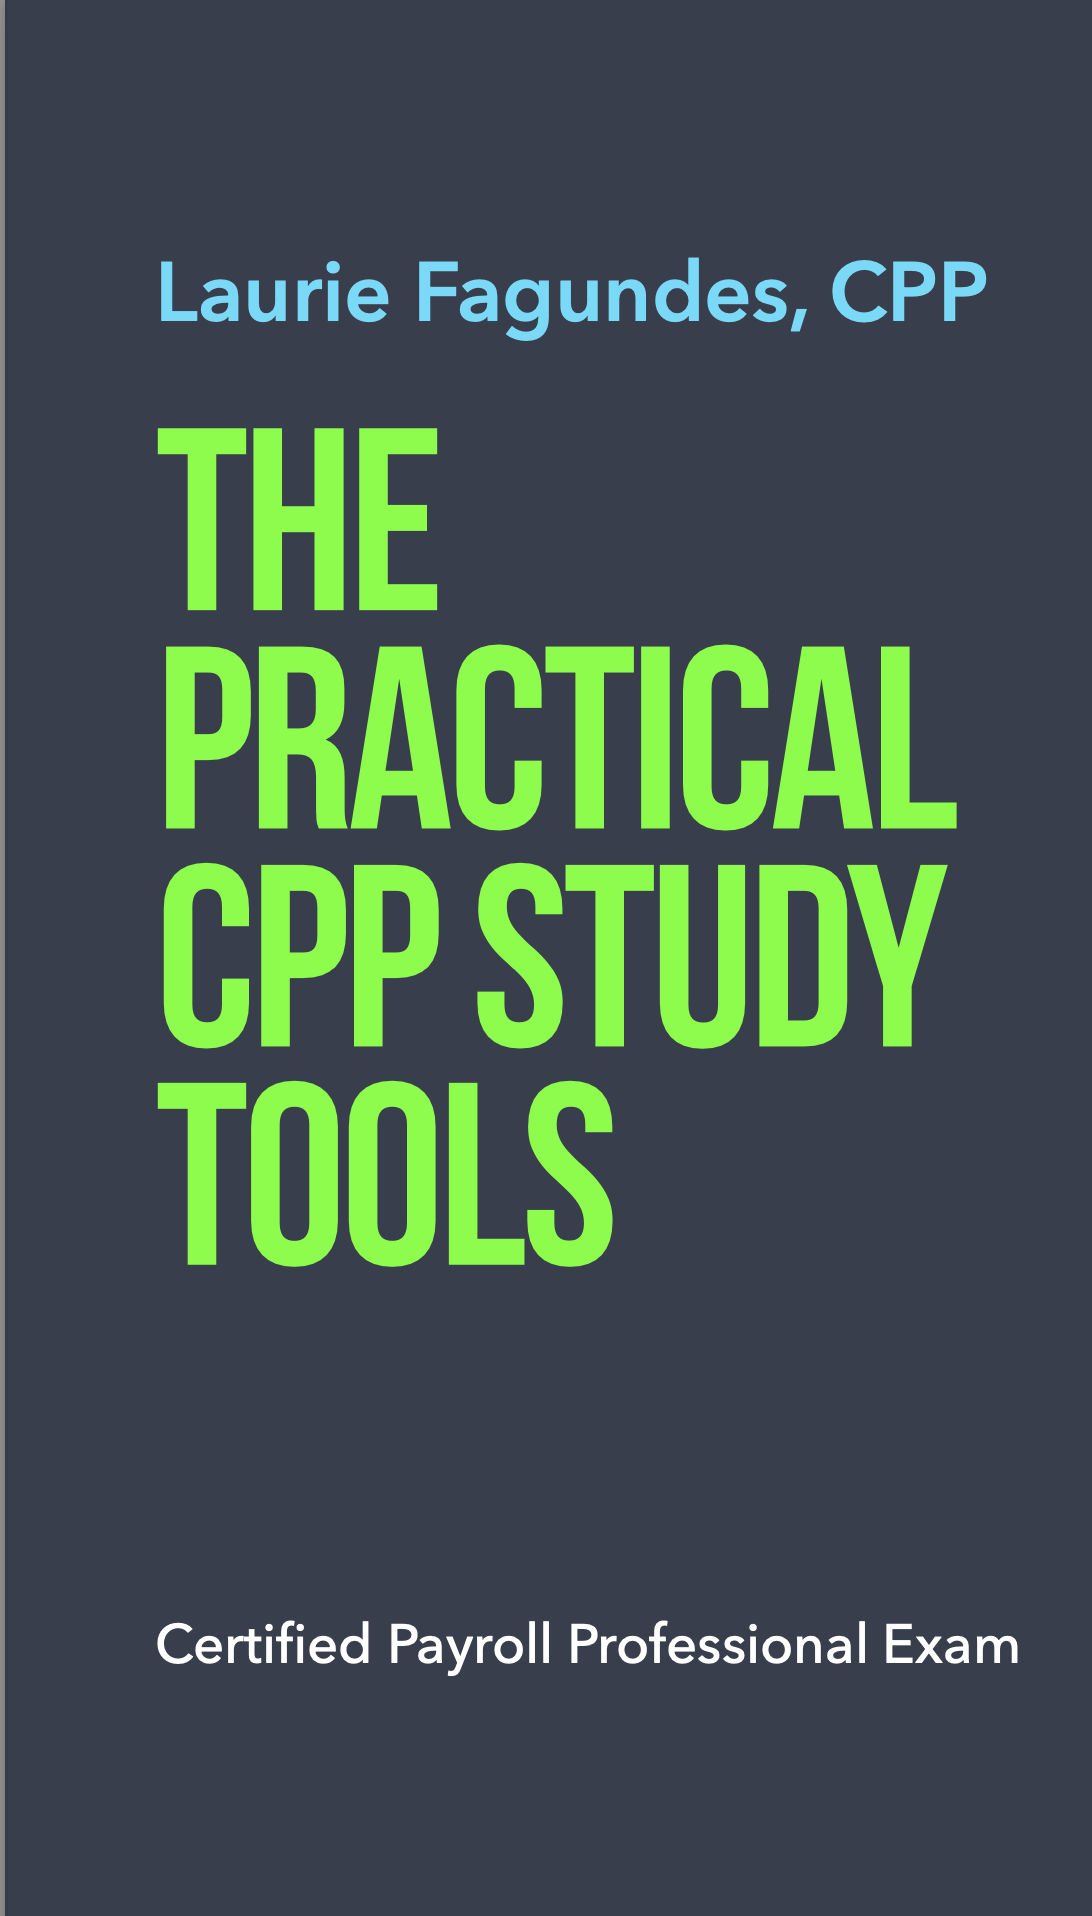 CPP Study Tools